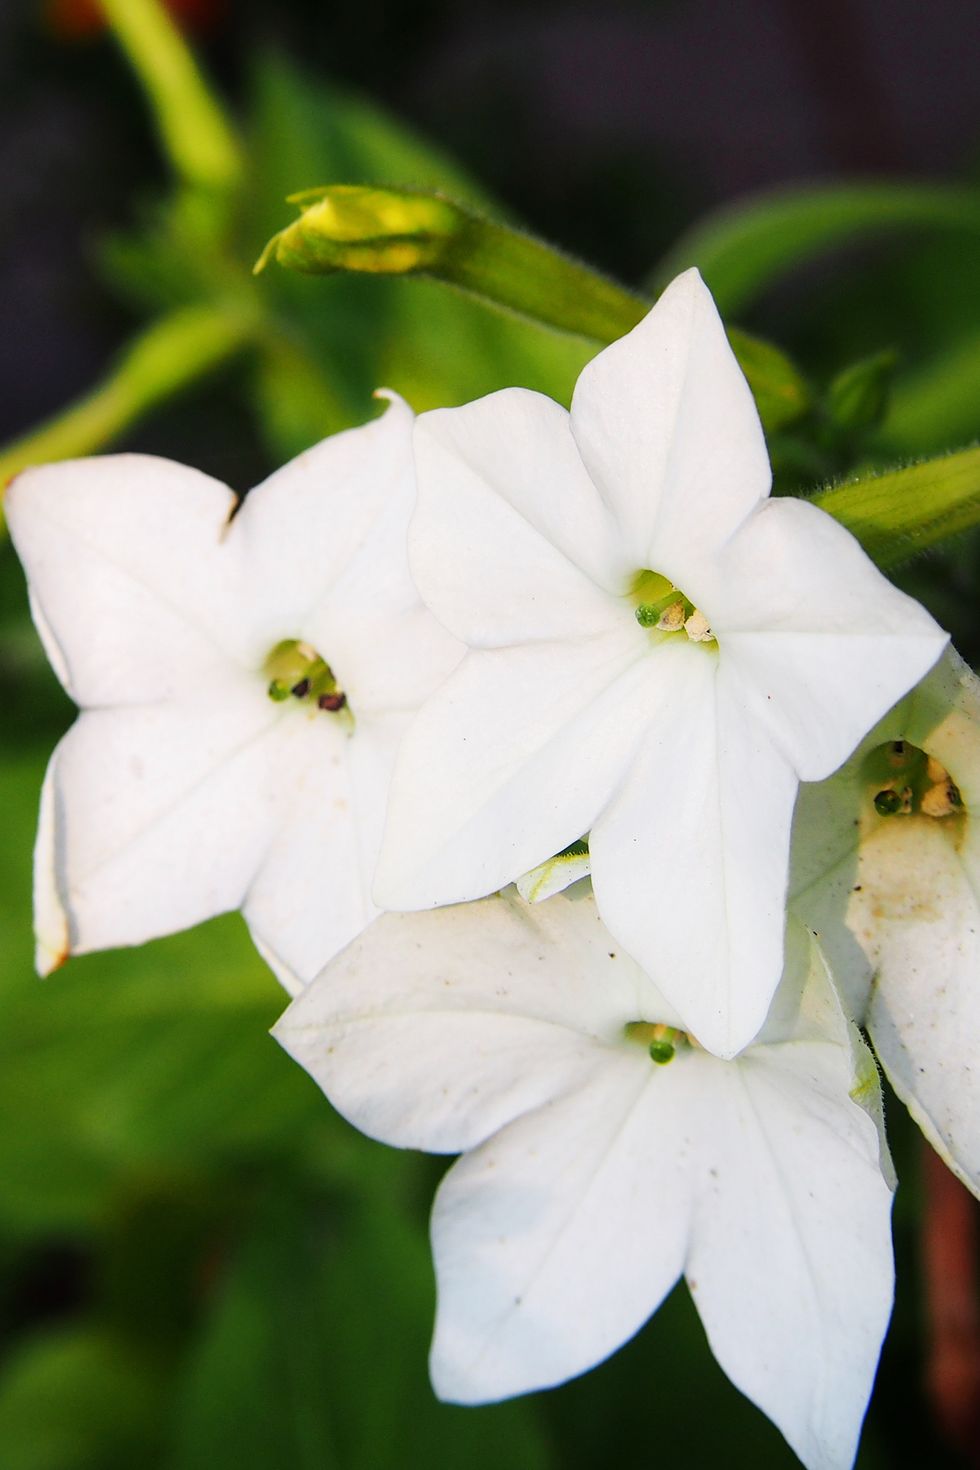 11 Fragrant Night Blooming Flowers - Best Flowers That Only Bloom at Night